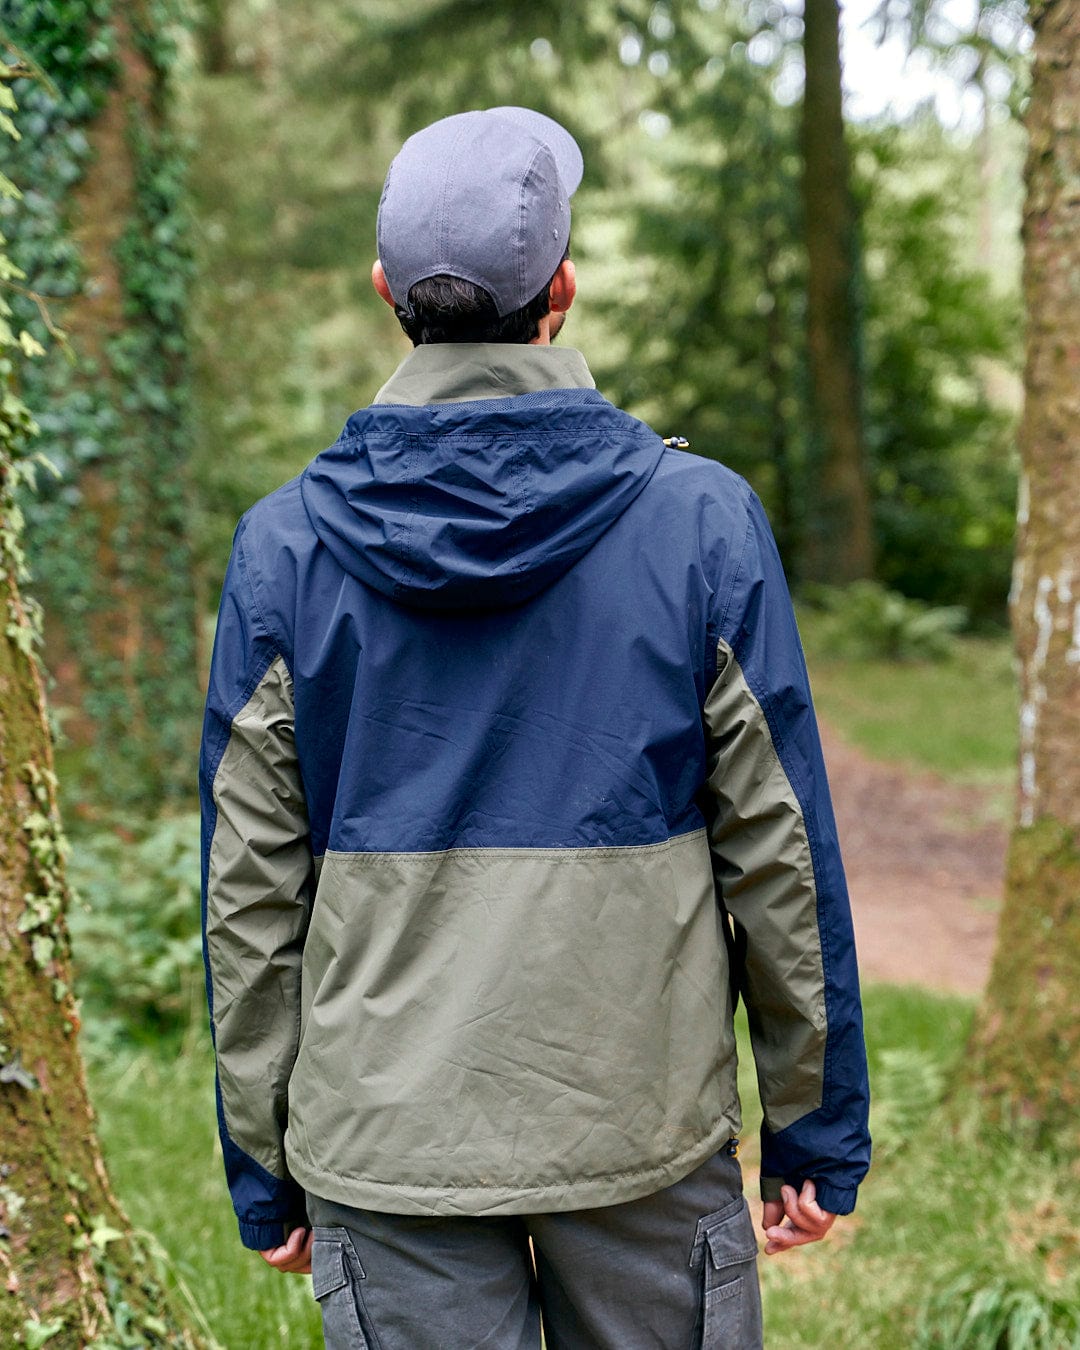 The Saltrock Nevis - Mens Waterproof Mac worn by the man in the woods features a velcro fastening for easy closure and is designed to be breathable.